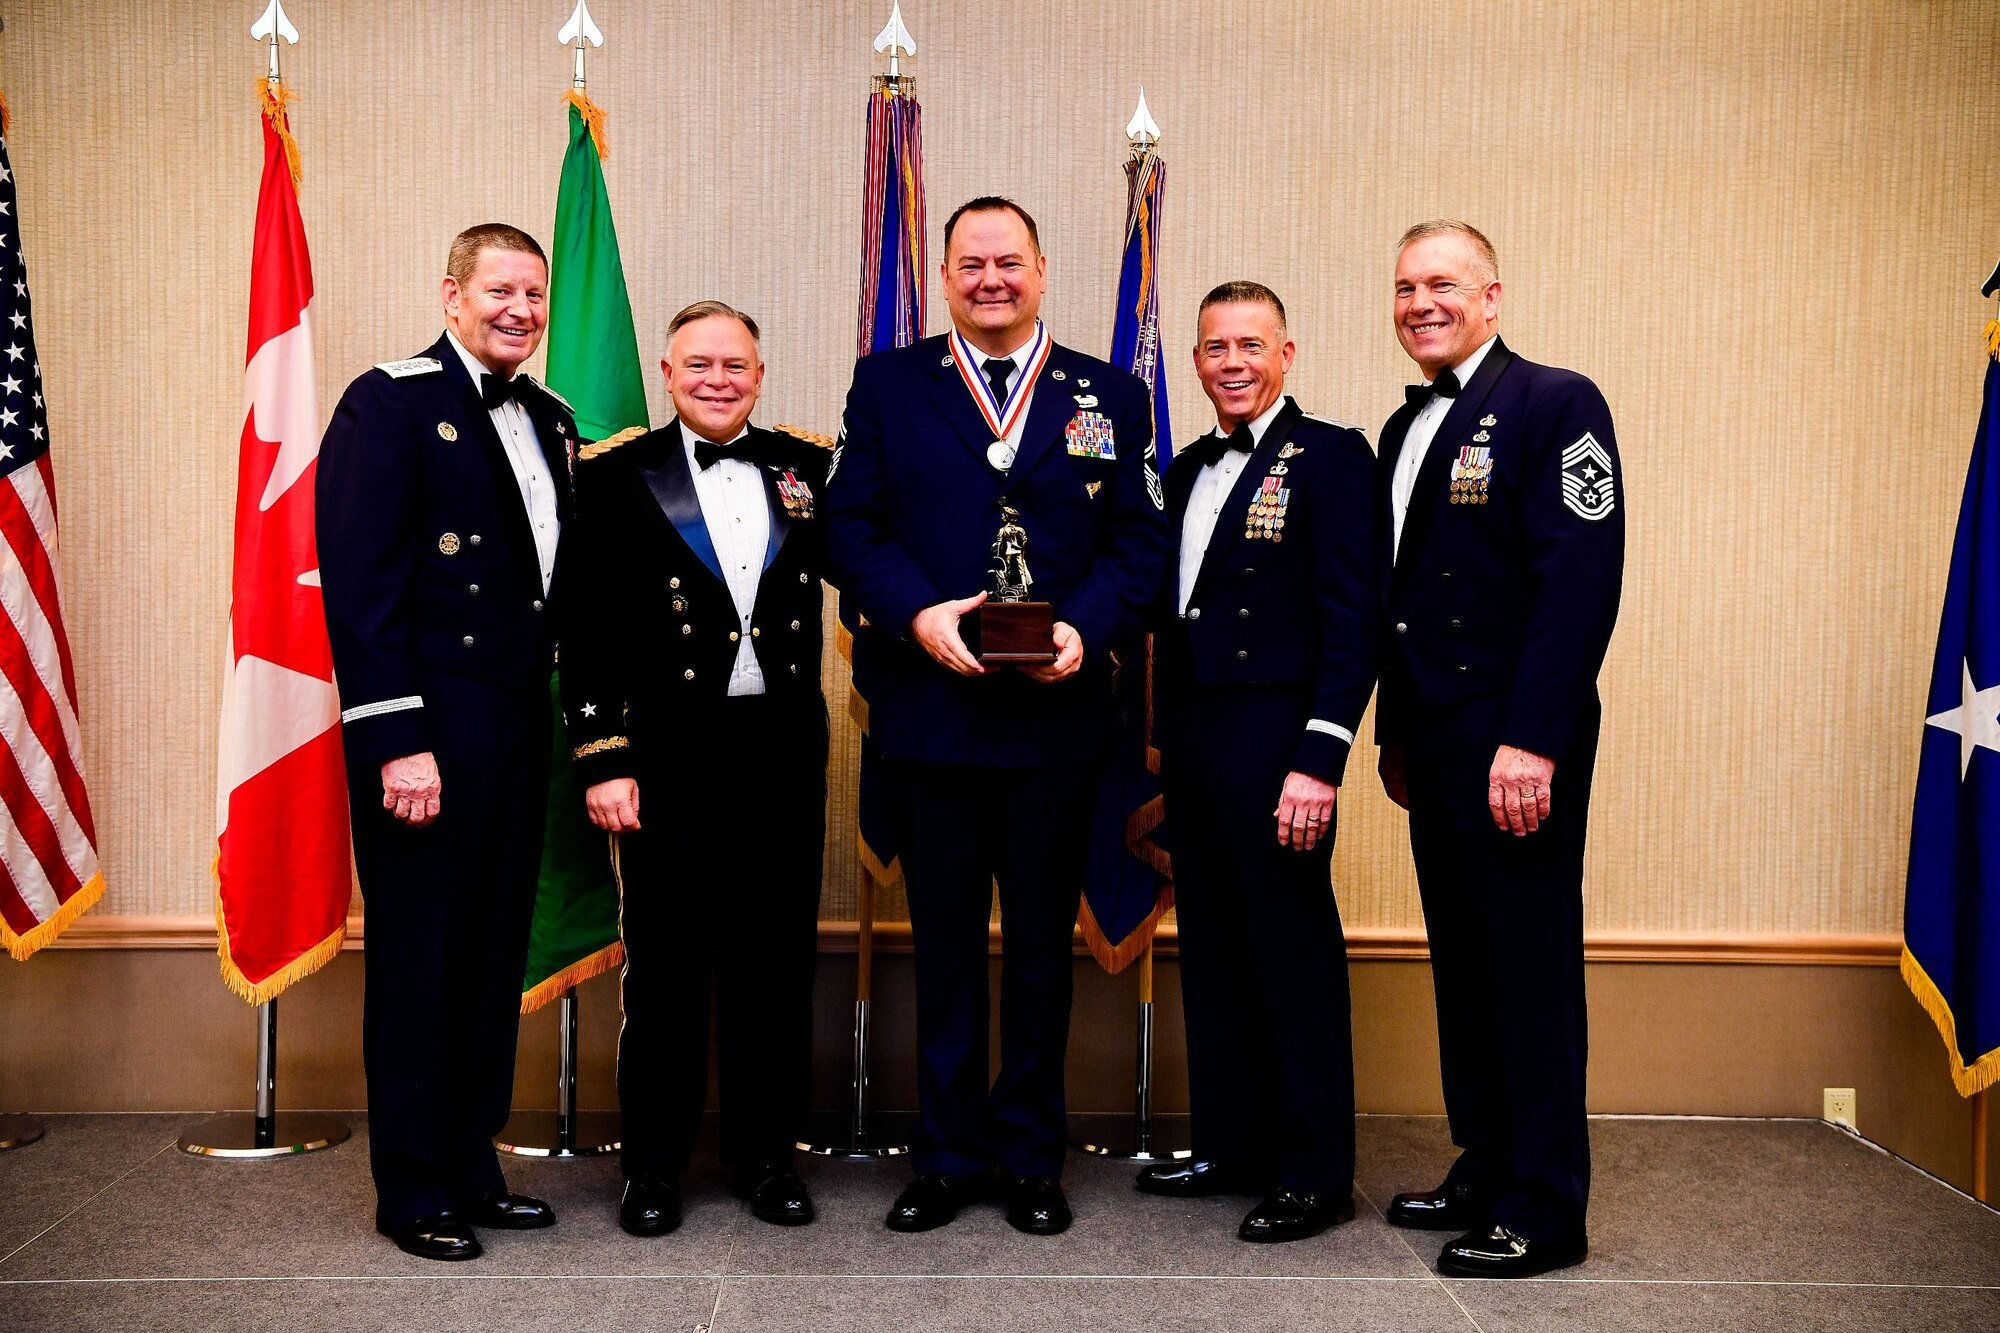 Senior Master Sgt. Jason Roland, the operations superintendent for the 111th Air Support Operations Squadron, 141st Air Refueling Wing, is presented with the Senior Non-Commissioned Officer of the Year trophy at the Washington Air National Guard’s 9th Annual Awards Banquet held at the American Lake Conference Center on Joint Base Lewis-McChord, Washington, Jan. 27, 2018.  Roland was awarded the trophy for his outstanding contributions to the Washington Air National Guard over the last year.  Pictured from left to right are: Gen. Robin Rand, Air Force Global Strike Command and Air Forces Strategic-Air, U.S. Strategic Command commander; Maj. Gen. Bret Daugherty, Adjutant General of the Washington National Guard, Roland, Brig. Gen. Jeremy Horn, commander of the Washington Air National Guard, and Chief Master Sgt. Max Tidwell, WA ANG command chief. (U.S. Air National Guard photo by Tech. Sgt. Timothy Chacon)